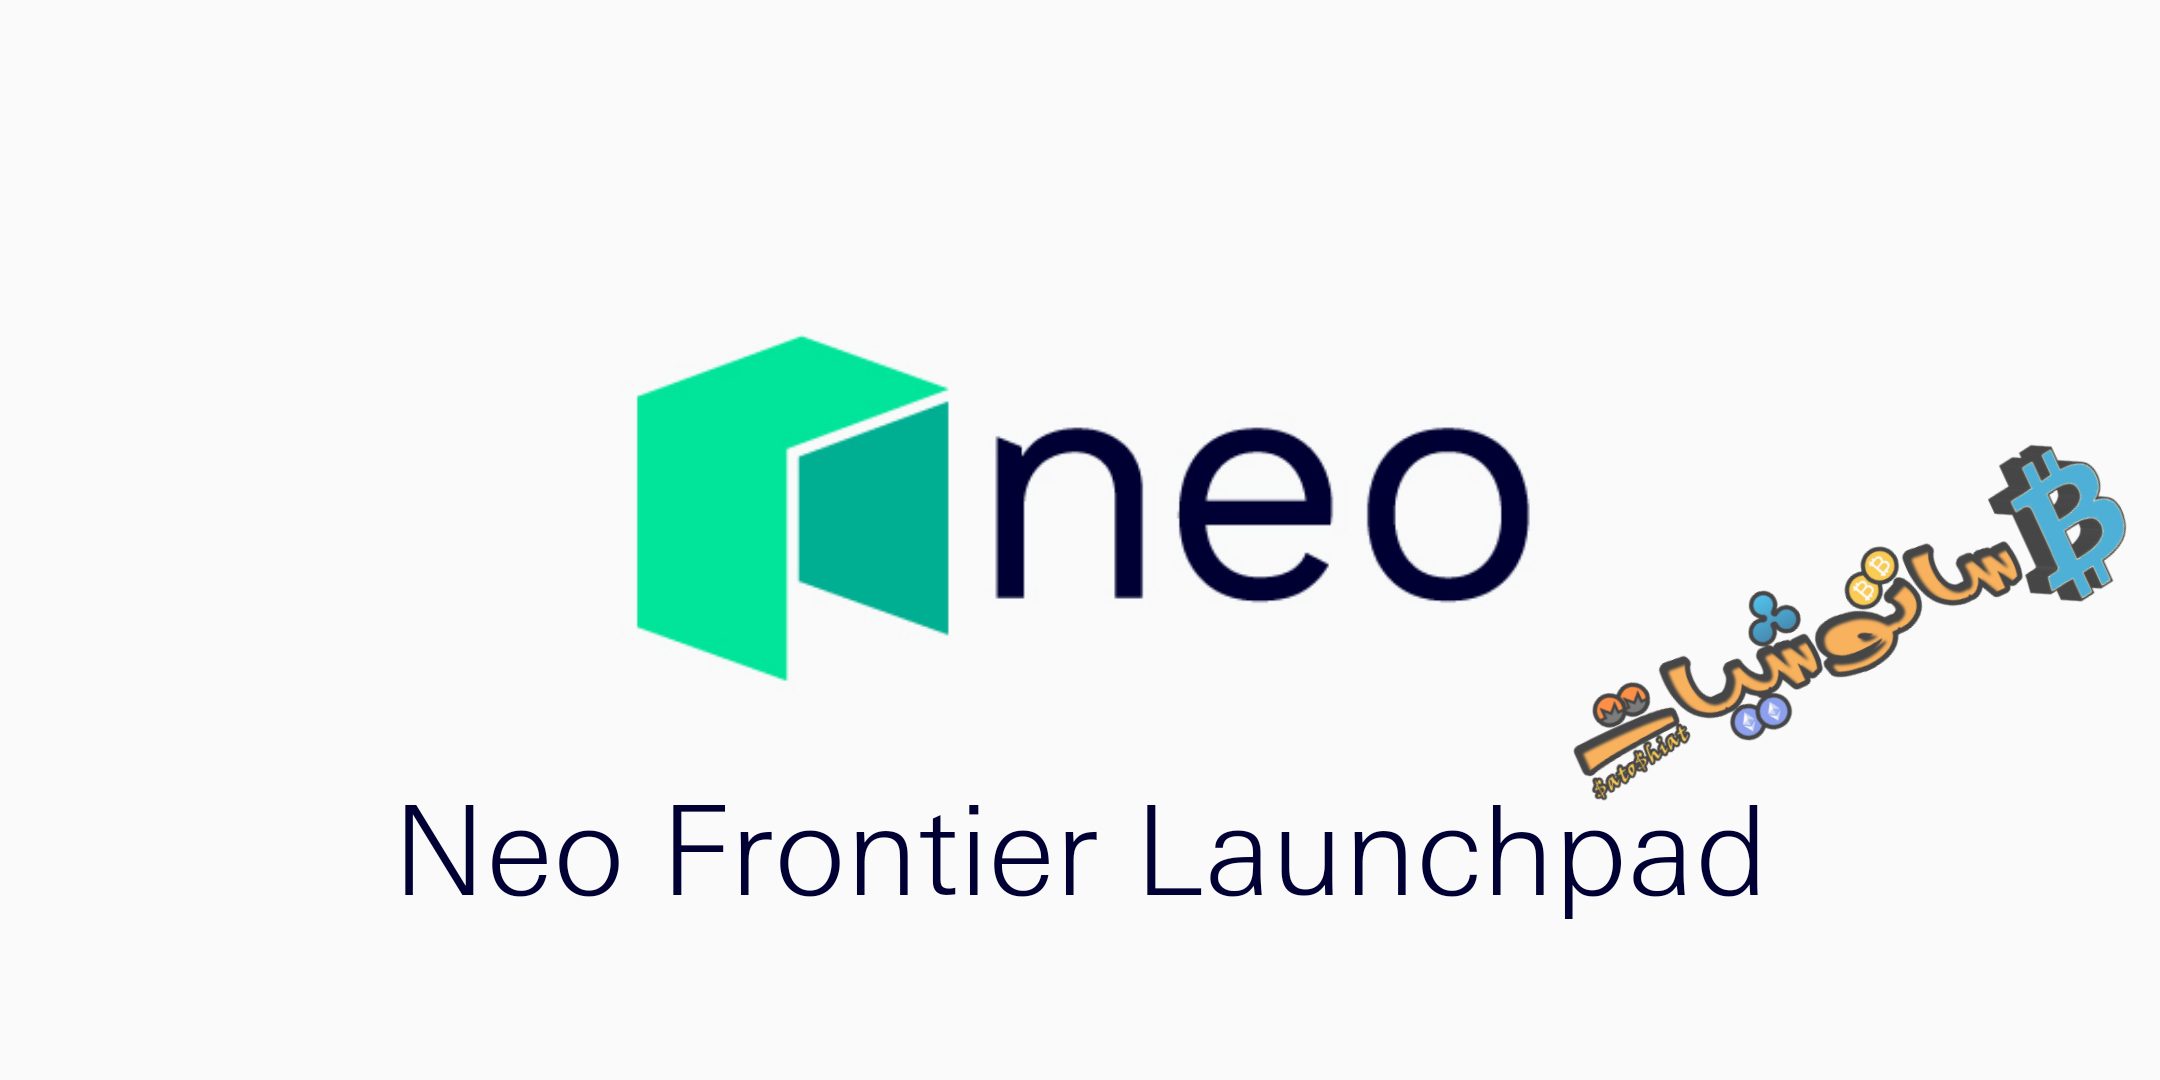 Neo Frontier Launchpad